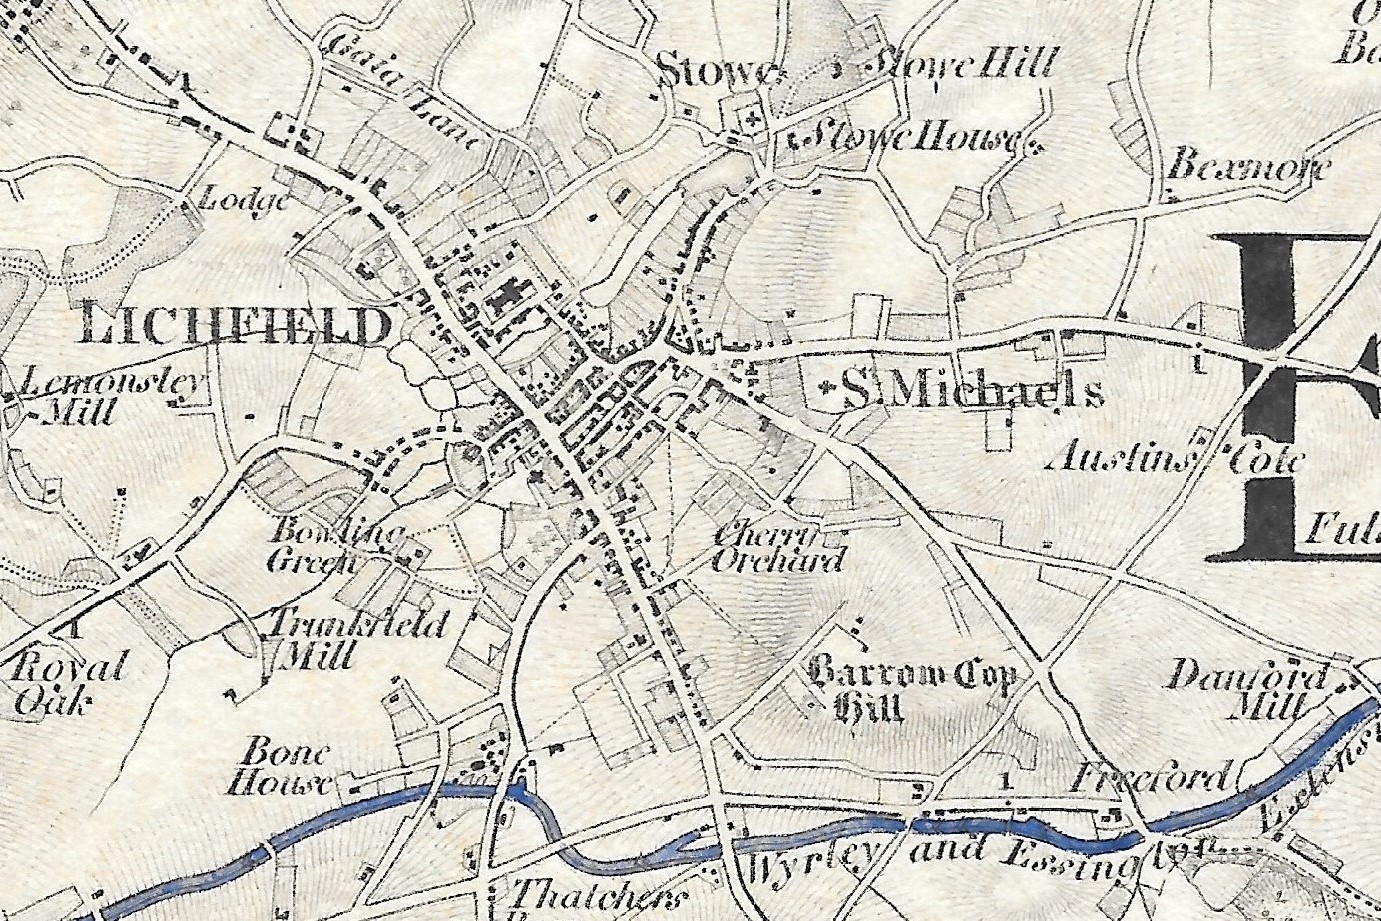 Extract from One-inch Map of 1834